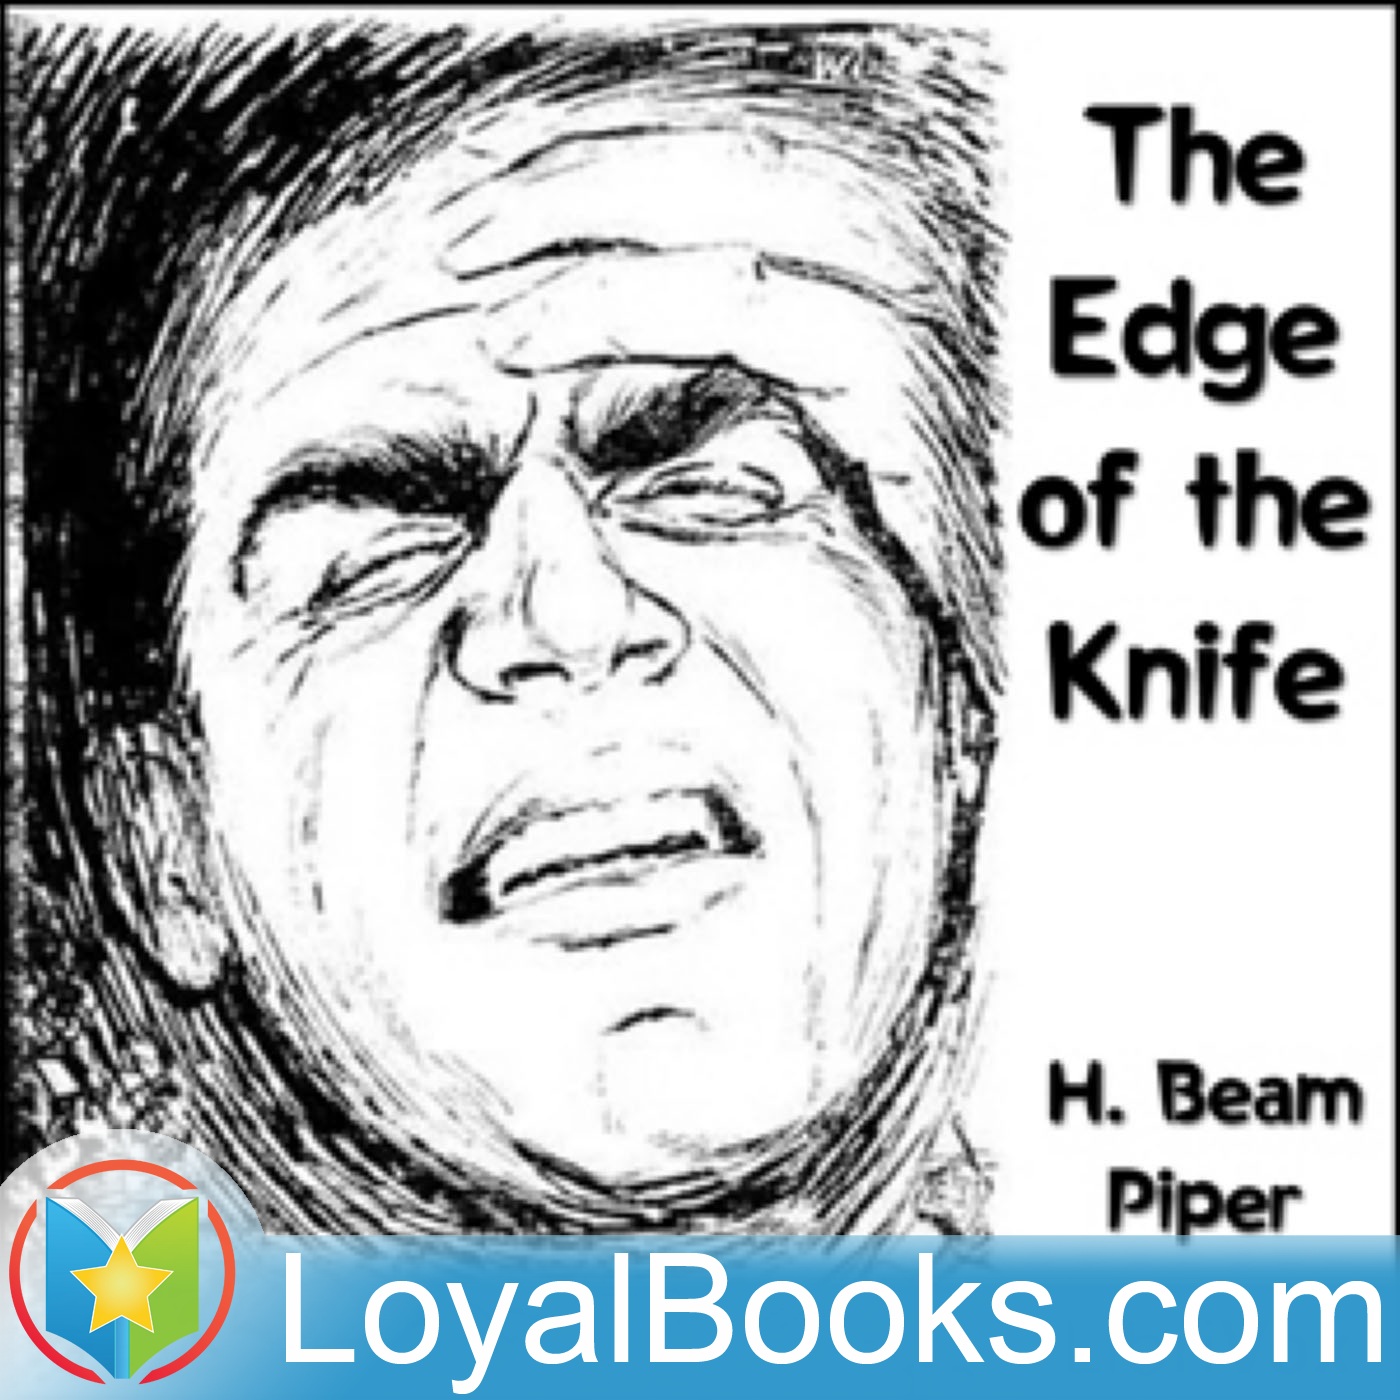 The Edge of the Knife by H. Beam Piper